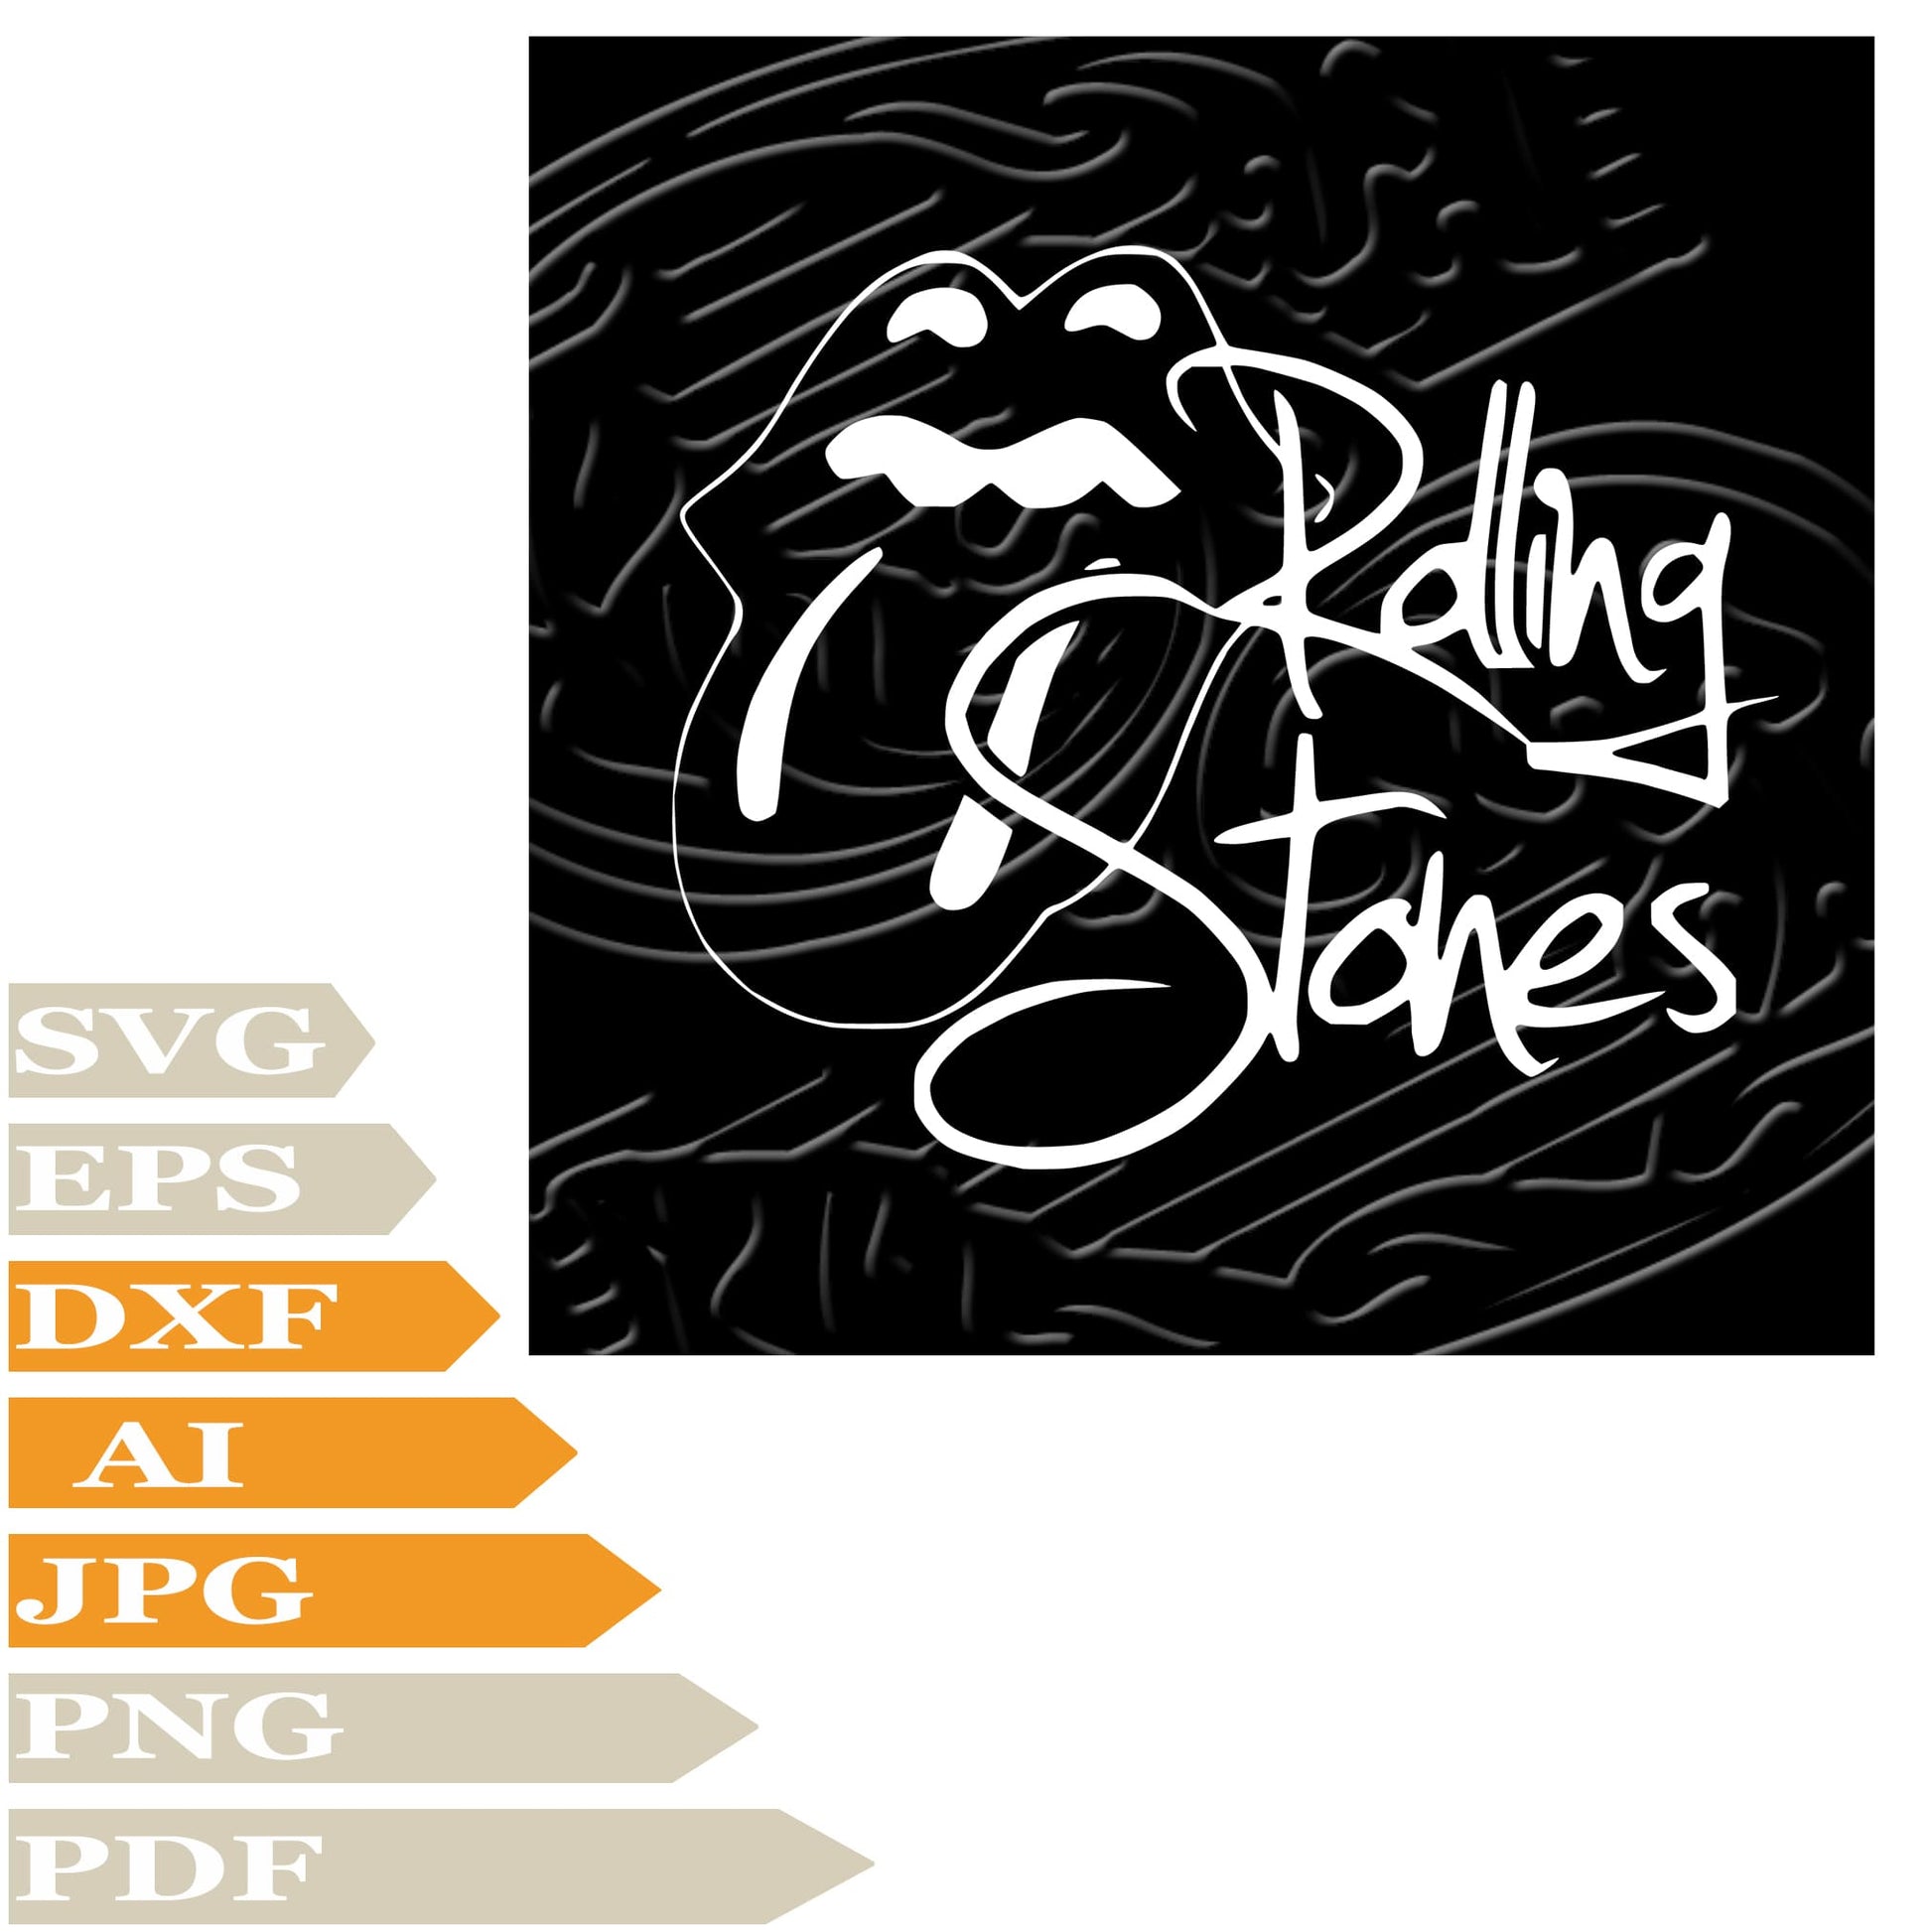 The Rolling Stones, Rolling Stones Logo Svg File, Image Cut, Png, For Tattoo, Silhouette, Digital Vector Download, Cut File, Clipart, For Cricut